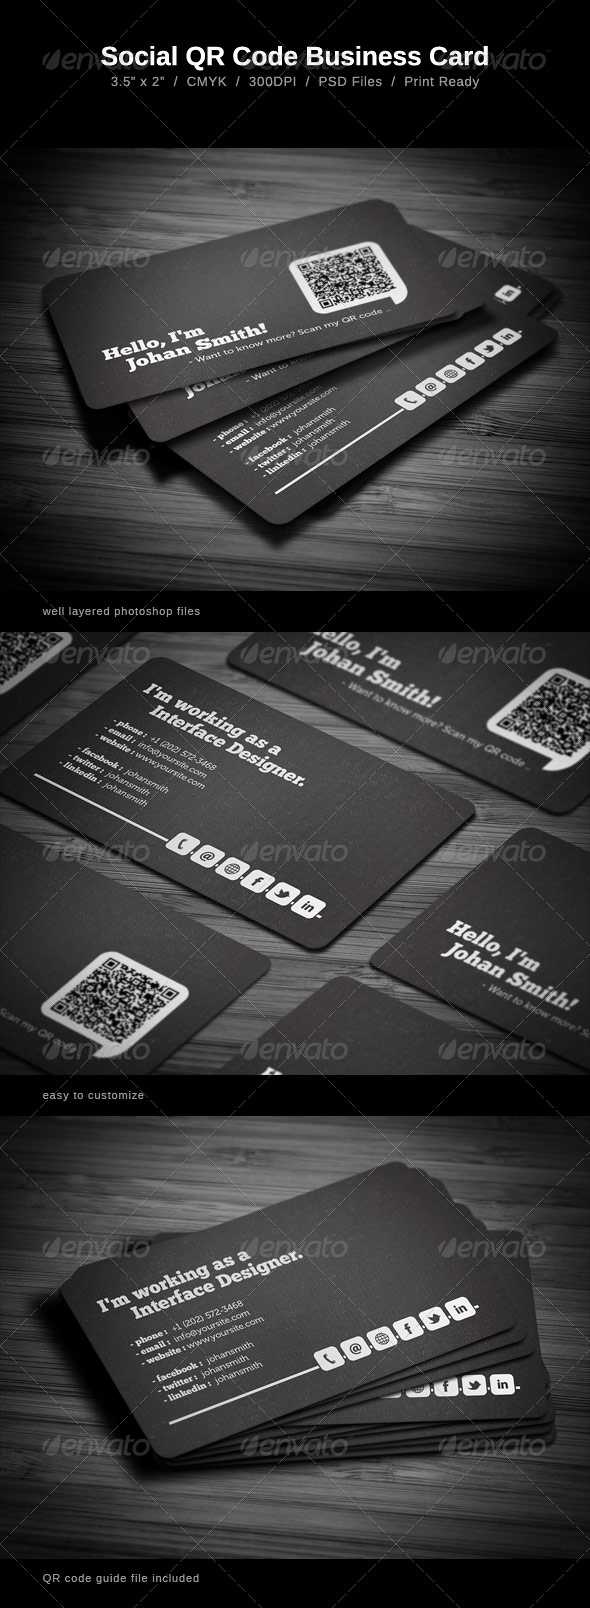 8 Noteworthy Back Of Business Cards Ideas (Design + Marketing) Regarding Business Cards For Teachers Templates Free